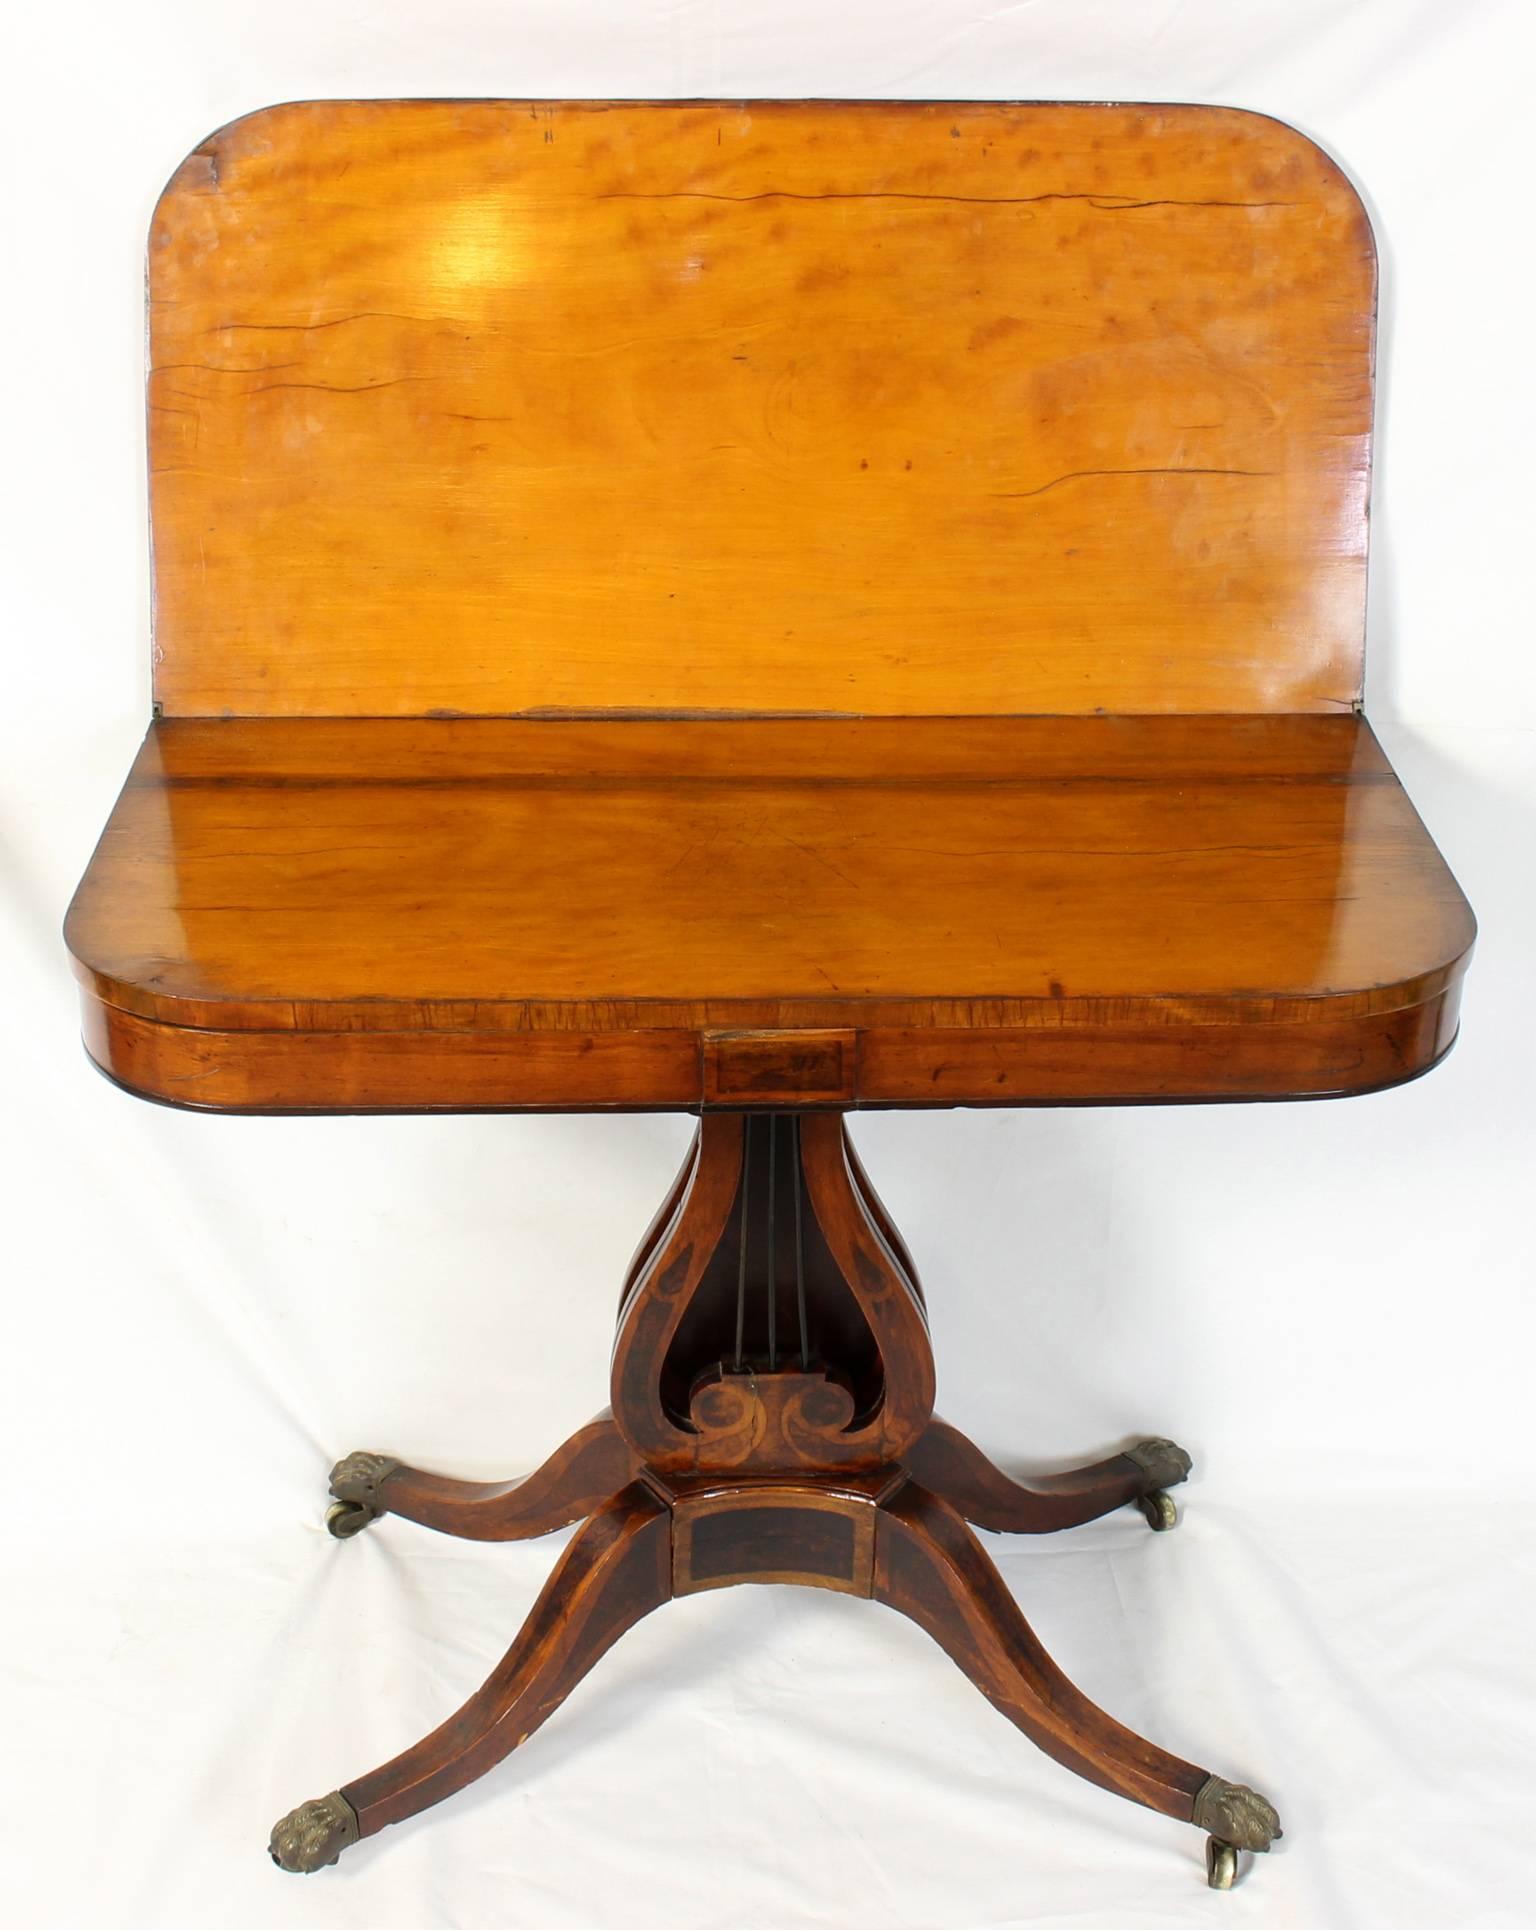 English Early 19th Century Lyre Shaped Card Table